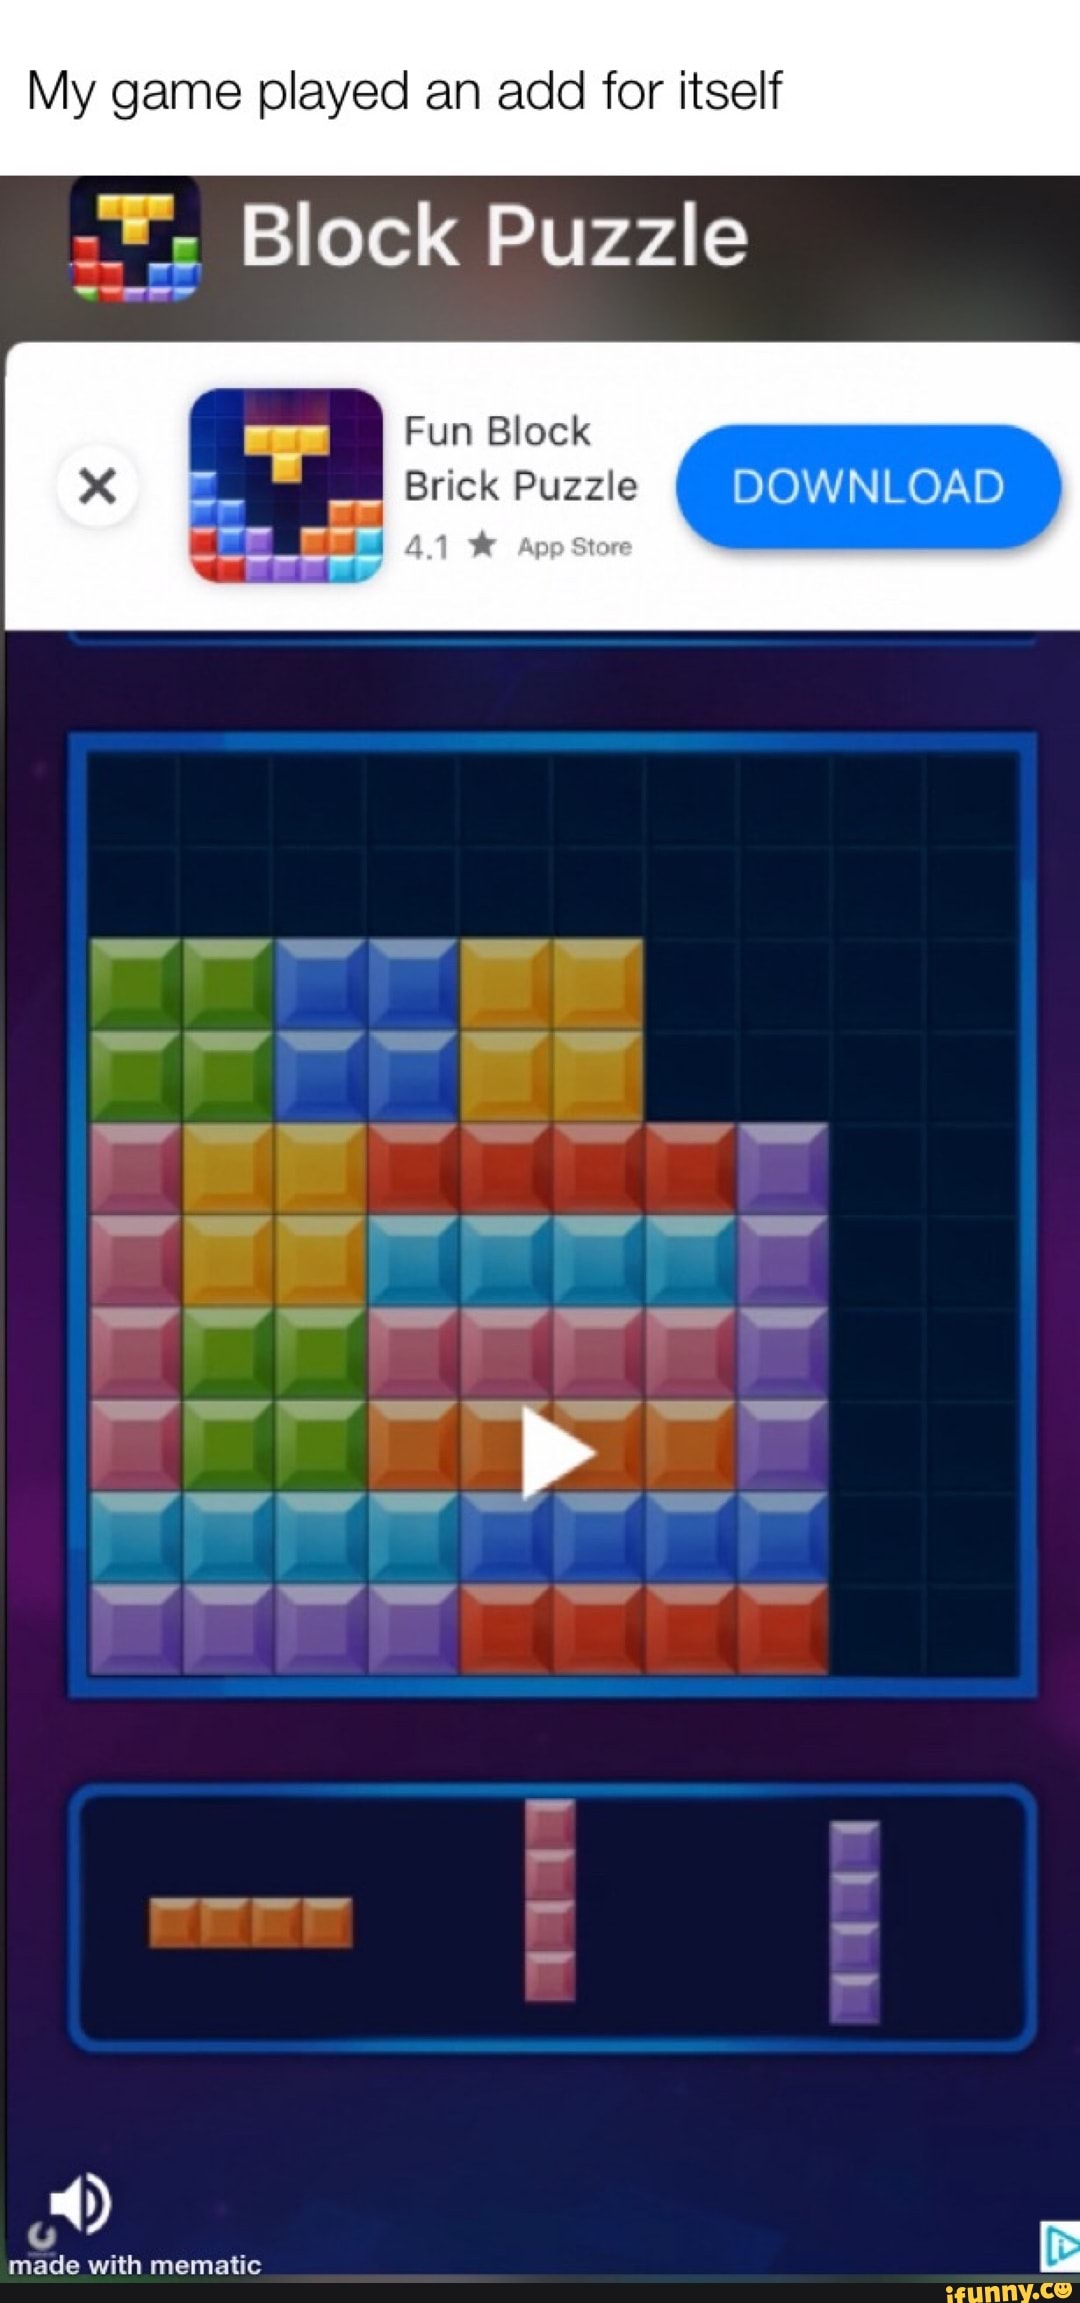 download the new for windows Blocks: Block Puzzle Games